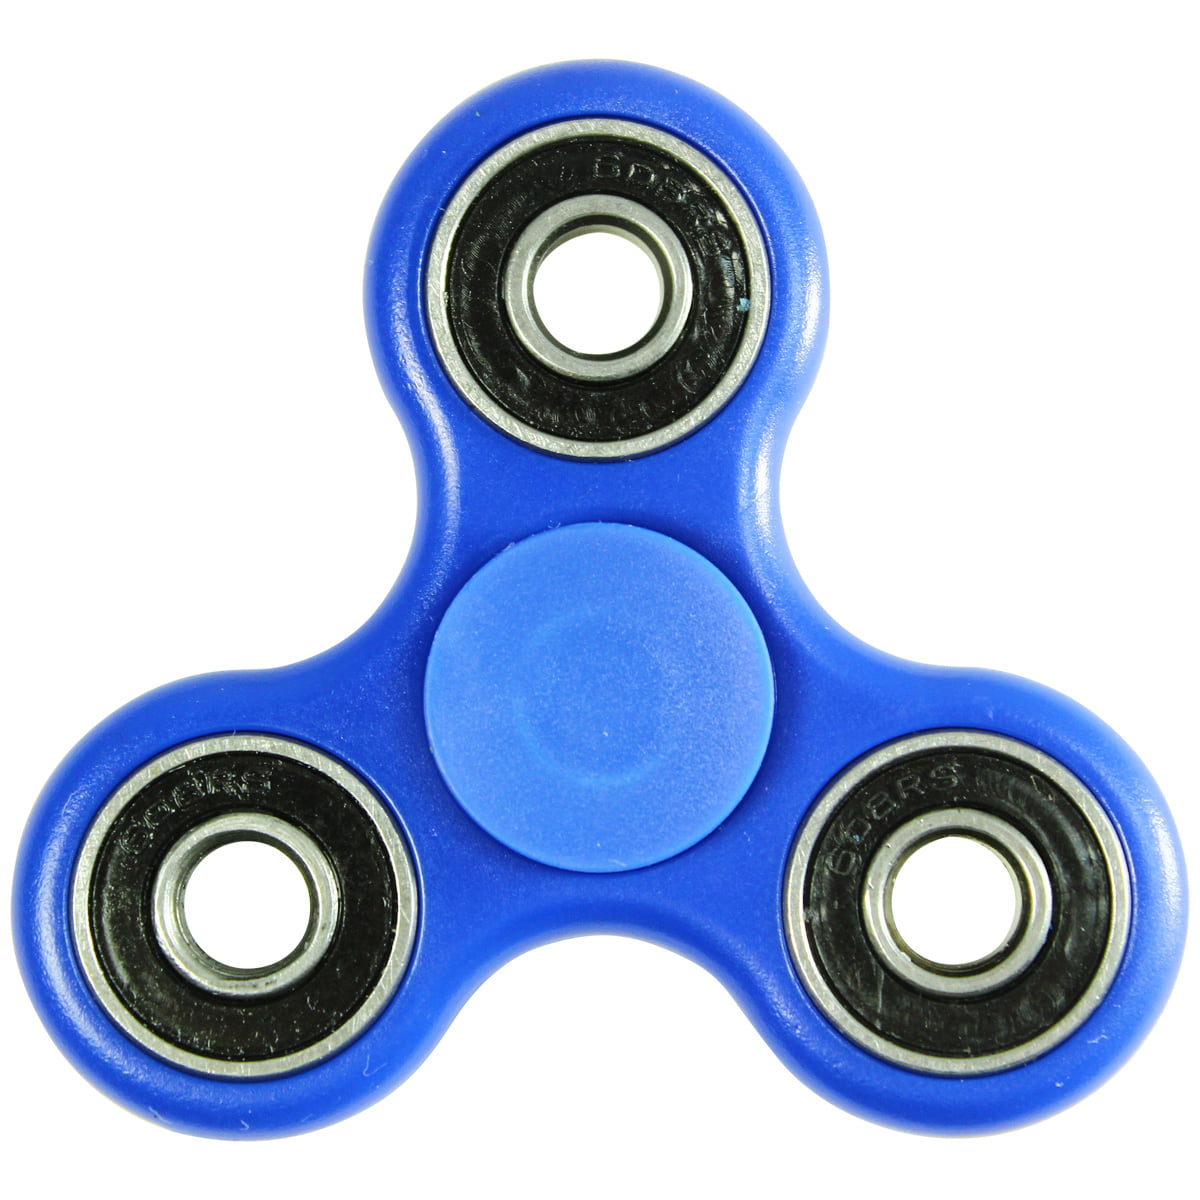 White Hand Spinner Fidget Toy Anxiety Stress Relief Focus EDC Tri Spinner ADHD 